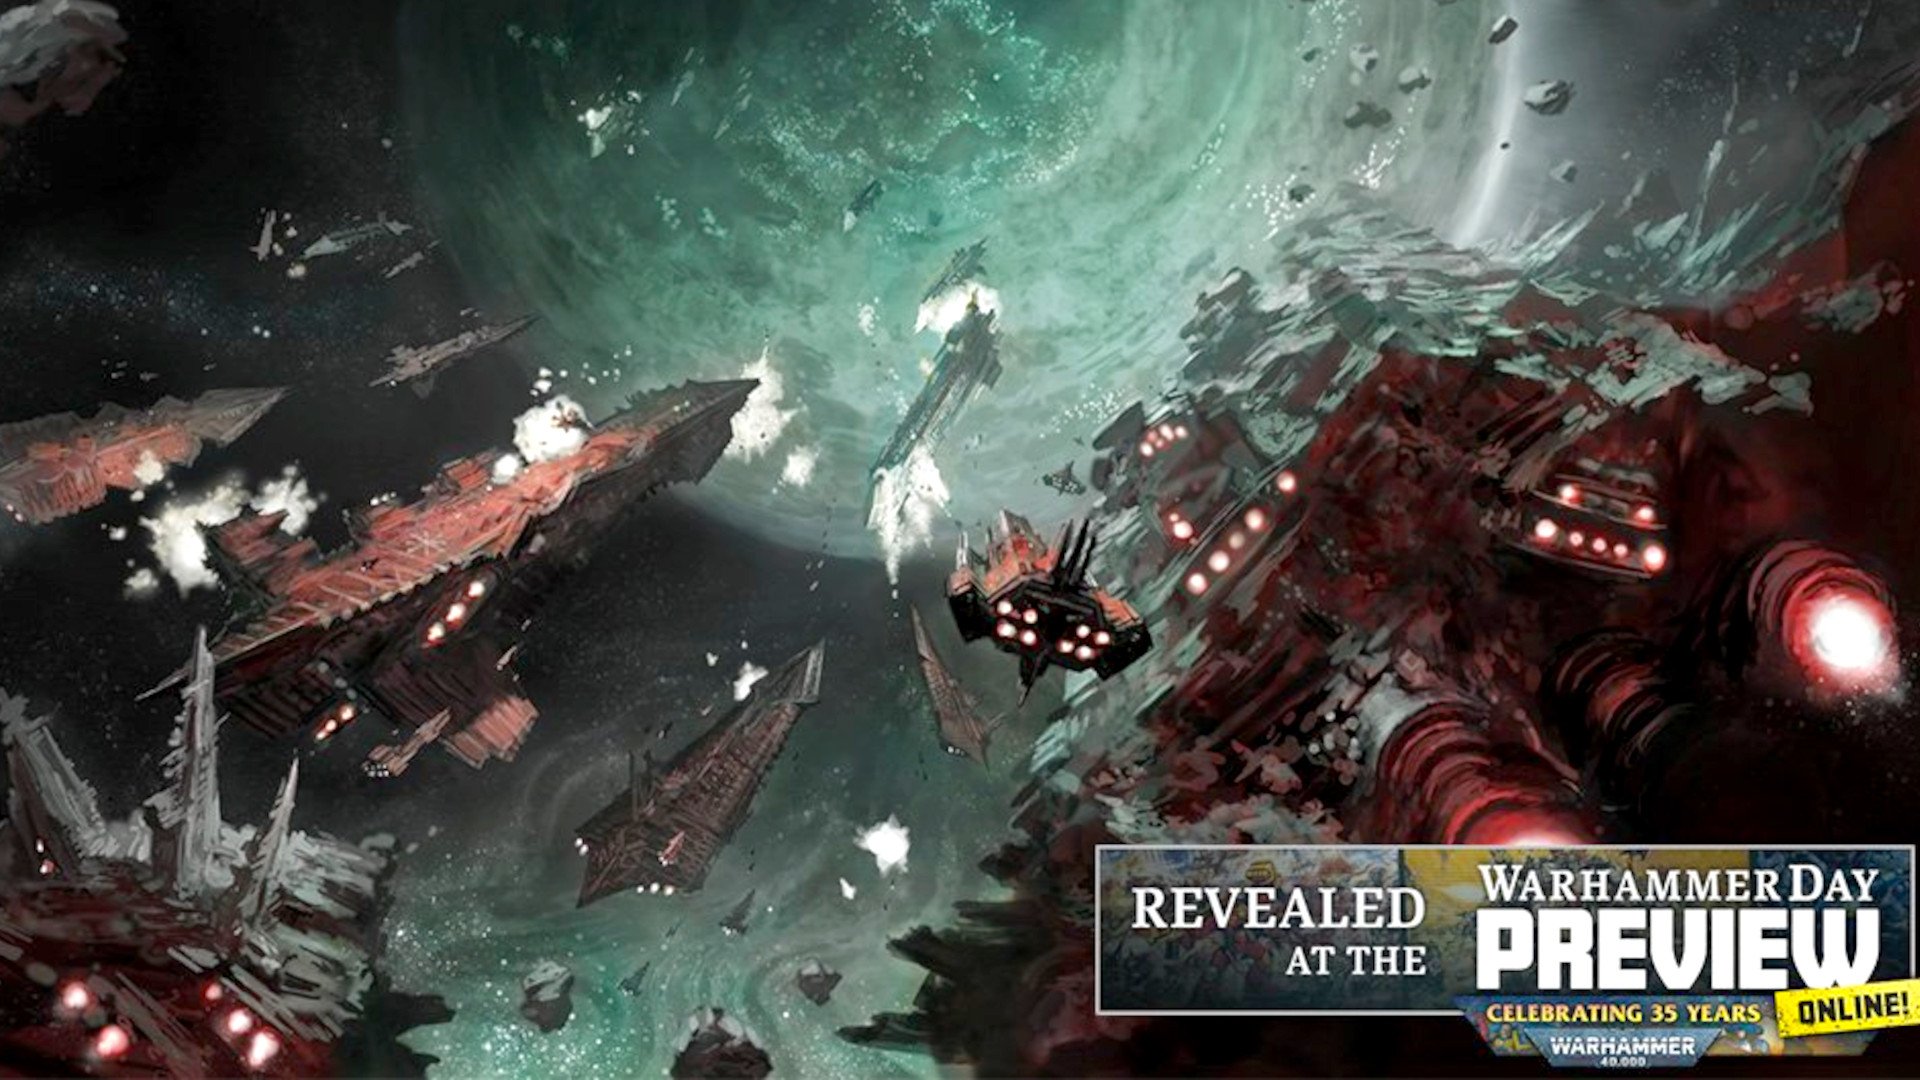 Warhammer 40k who is the Arkifane - Games Workshop image showing the Arkifane daemon meeting the Arks of Omen, Abaddon's new fleet of Space Hulks, flying off to war